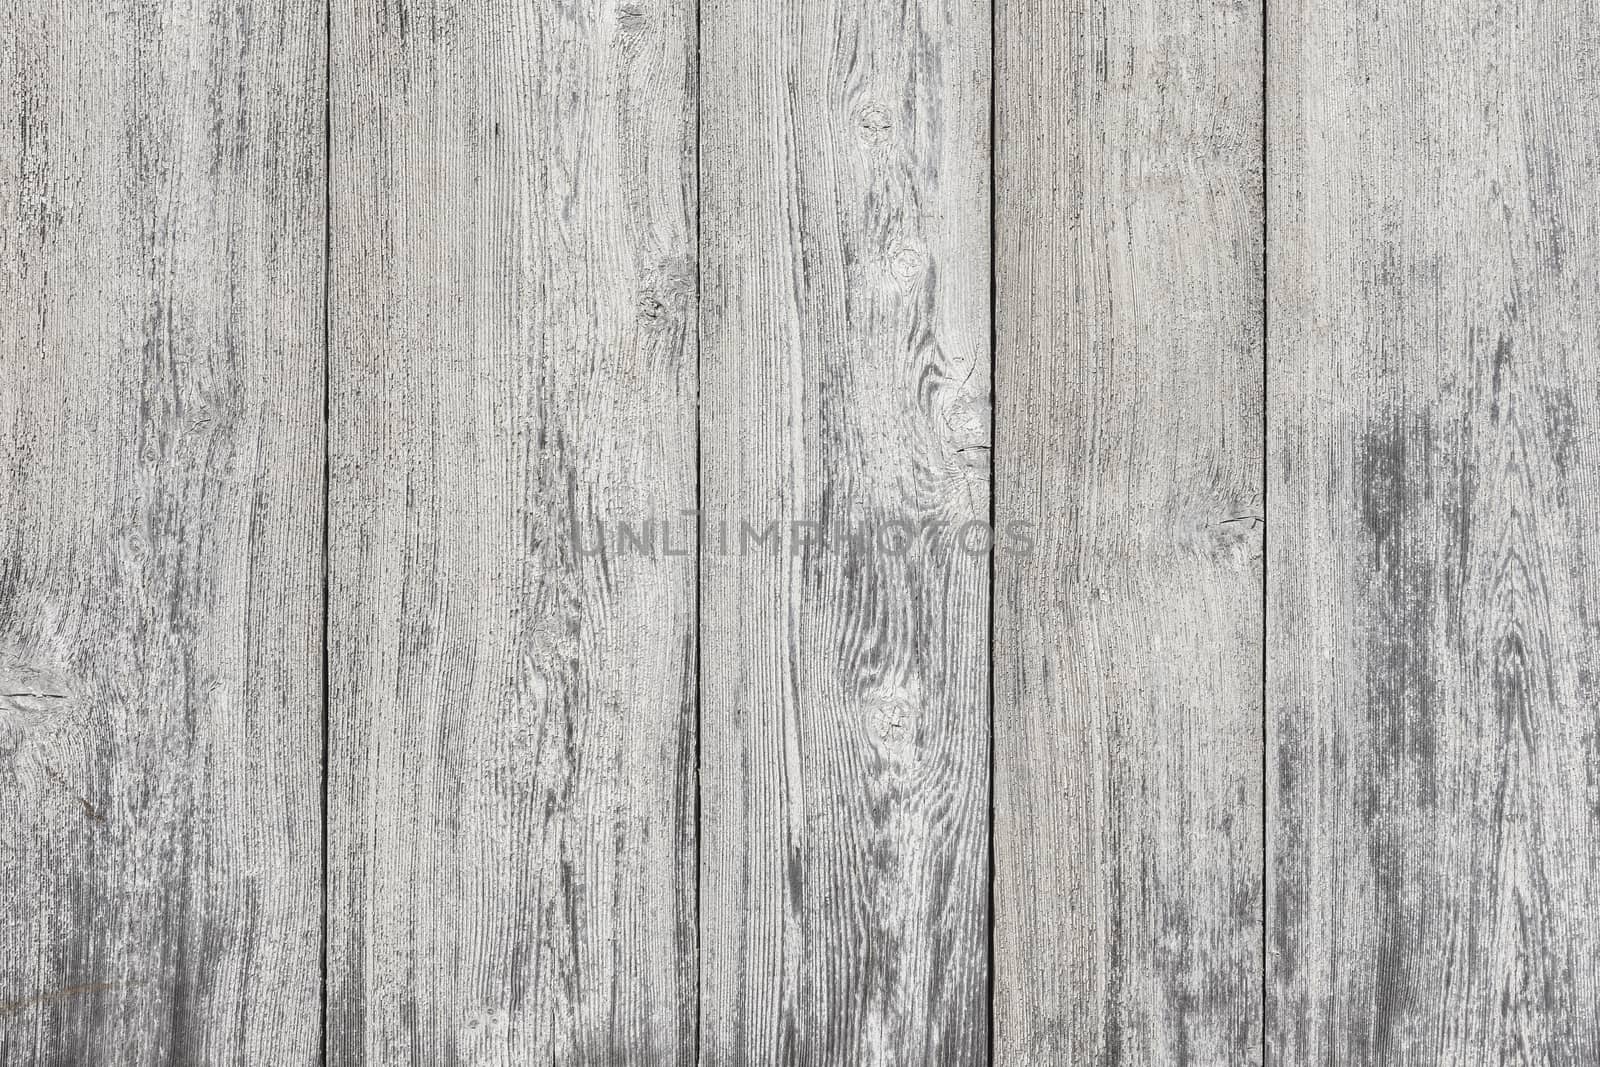 White wood texture background by 2nix